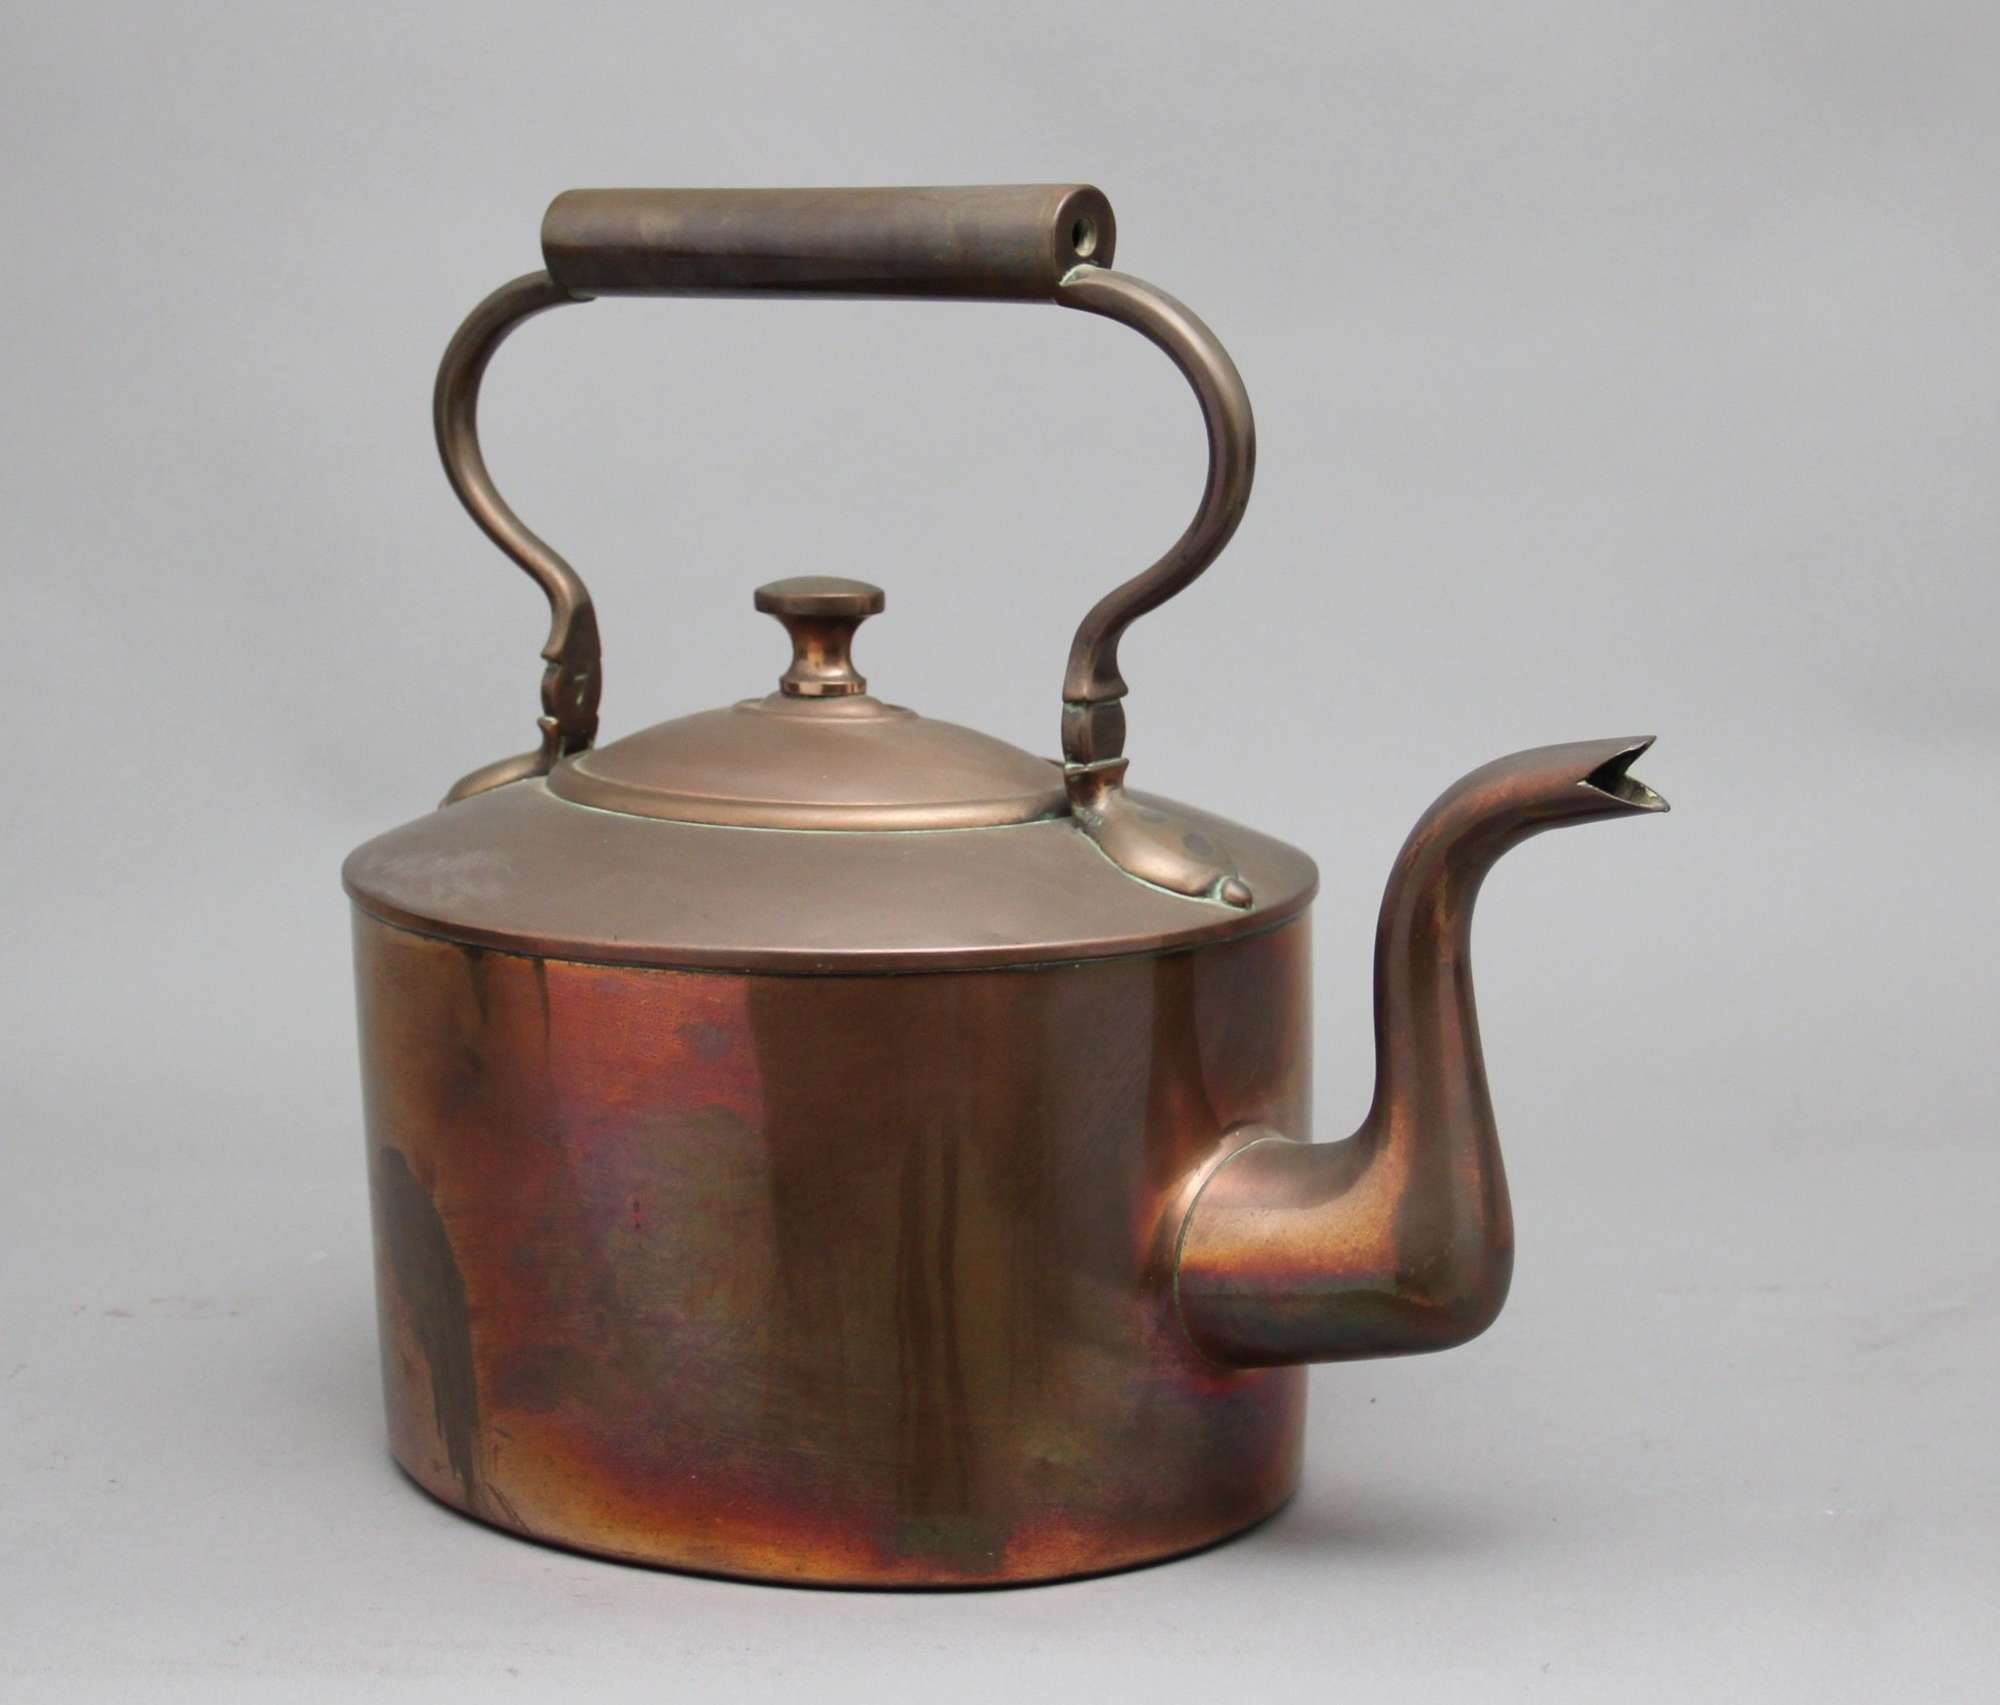 Large 19th Century Brass Copper Kettle